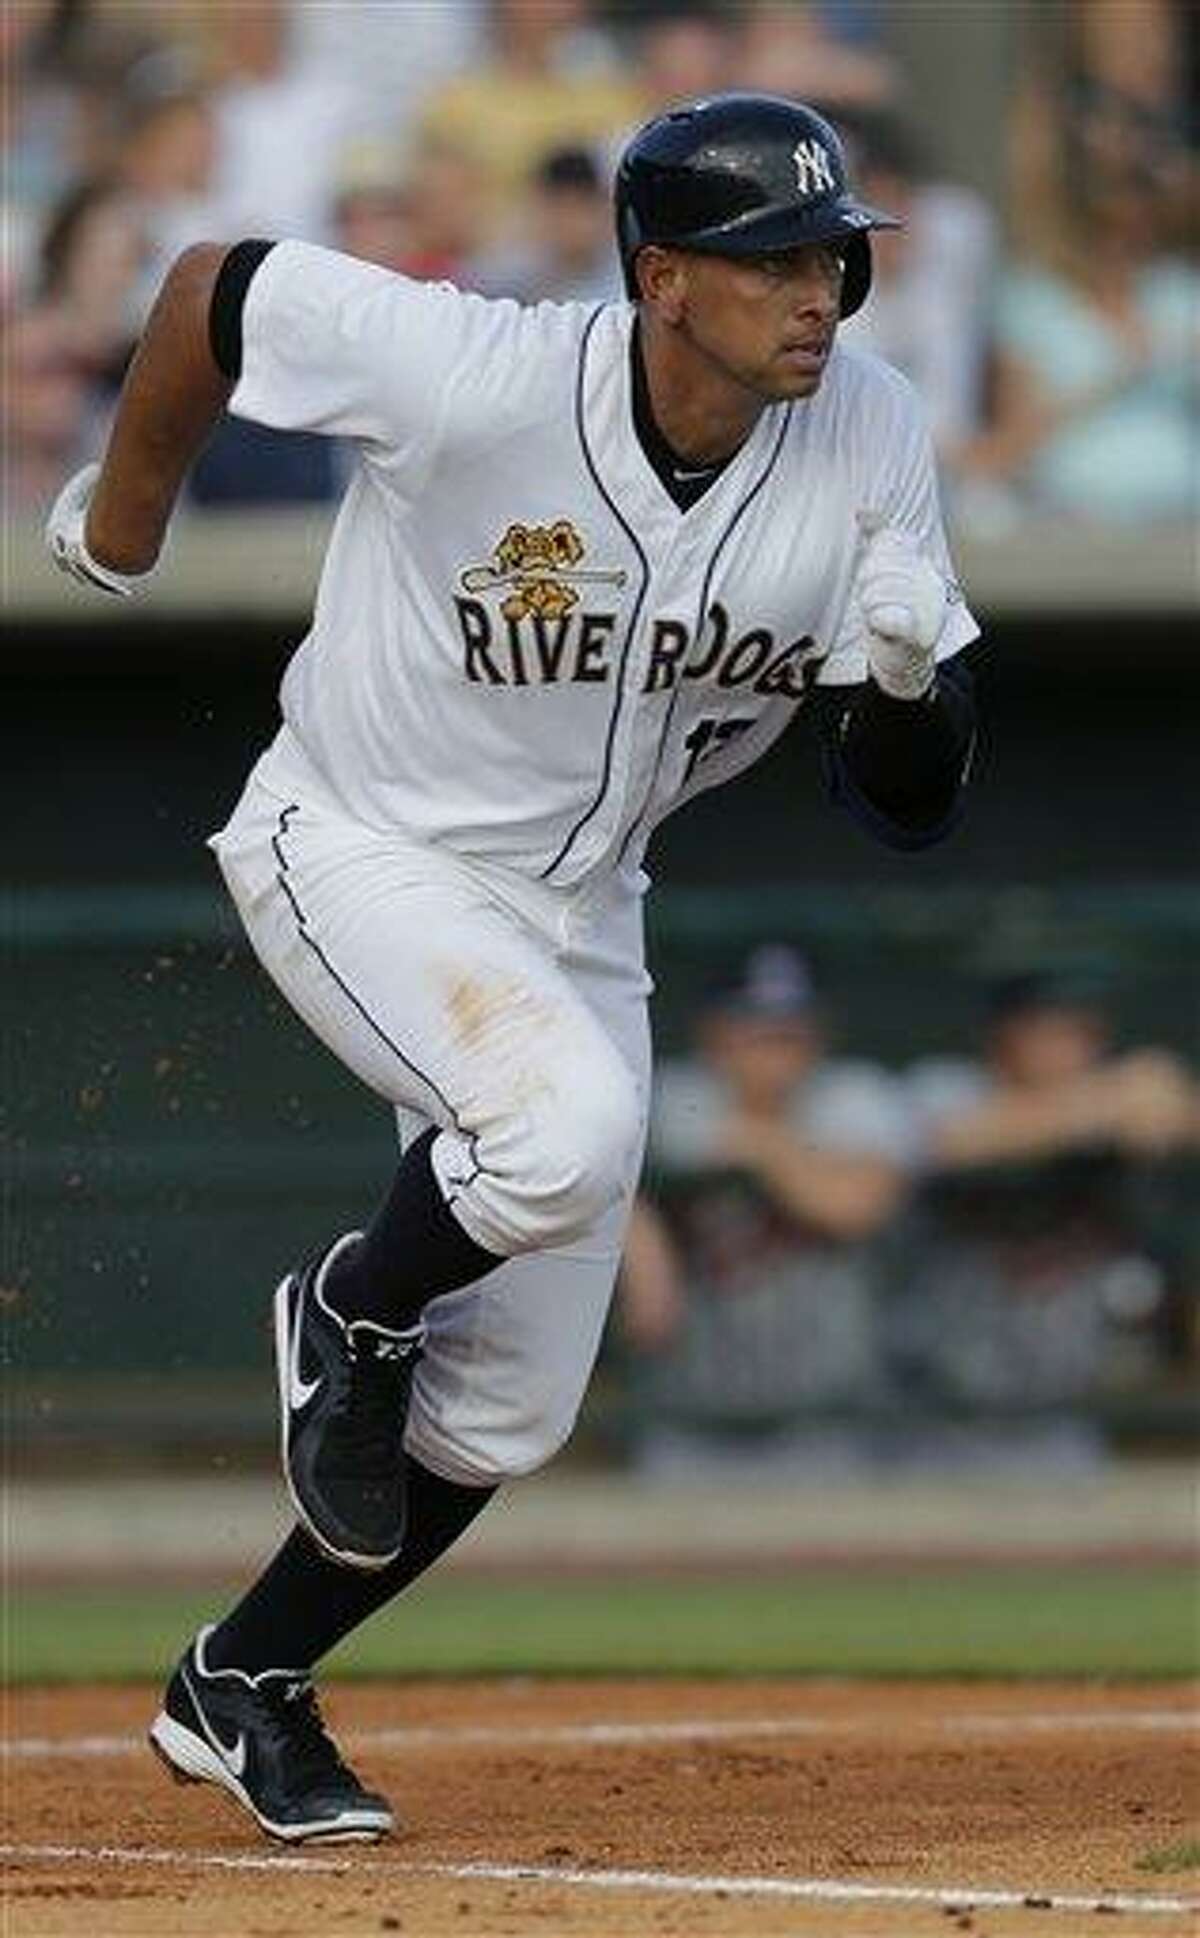 New York Yankees' Alex Rodriguez runs out a ground ball in the first inning in his second rehab game with the Charleston RiverDogs in Charleston, S.C., Wednesday, July 3, 2013. (AP Photo/Chuck Burton)